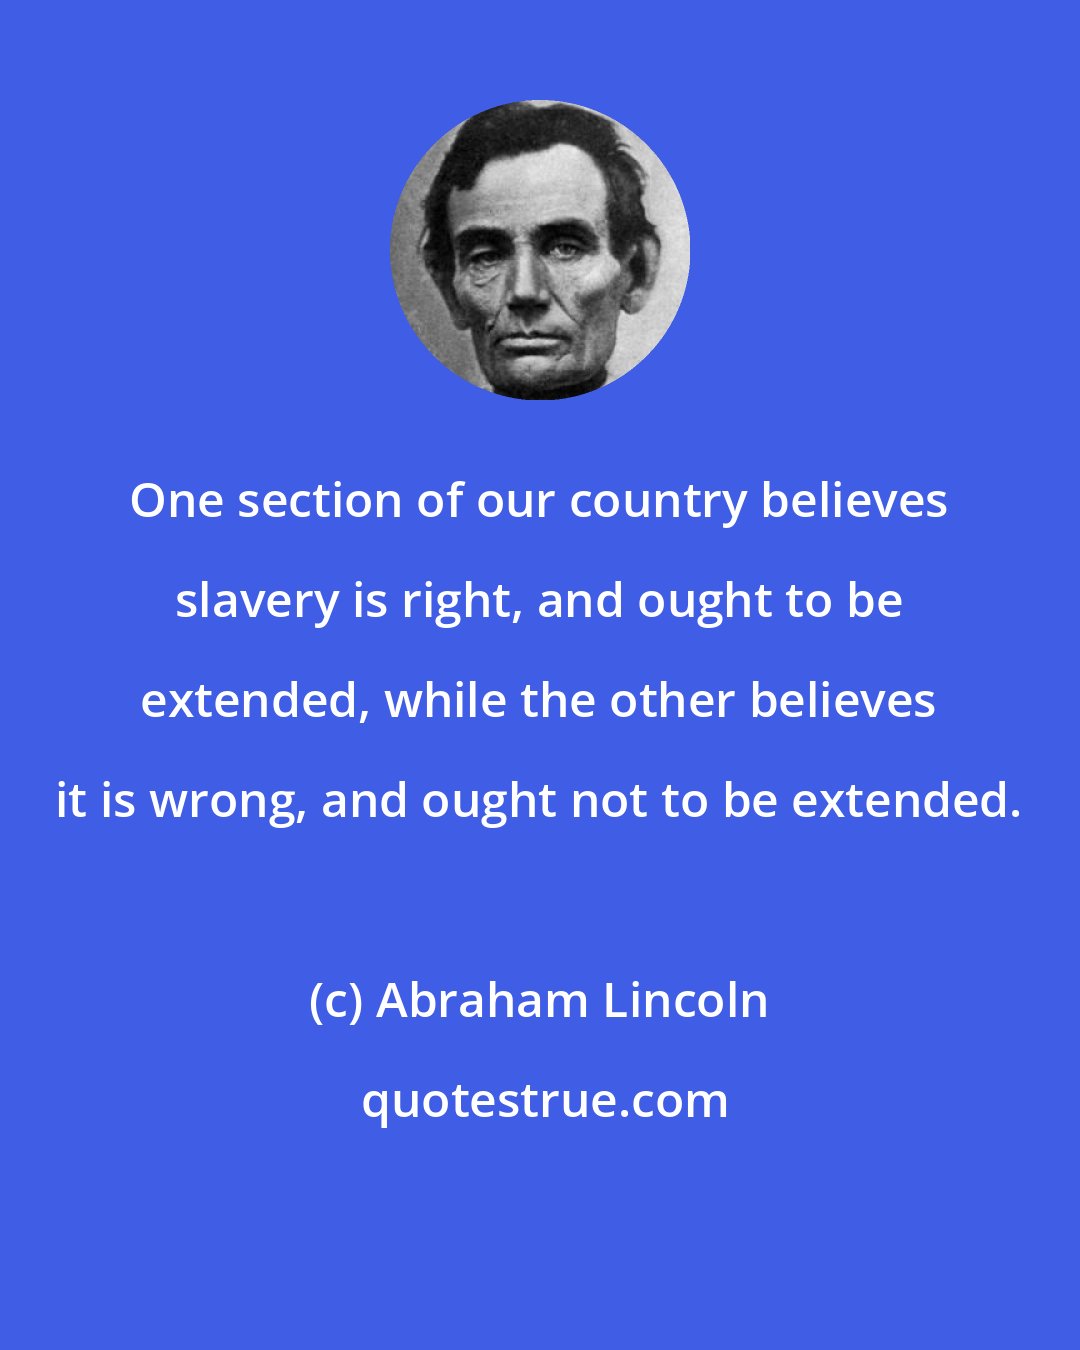 Abraham Lincoln: One section of our country believes slavery is right, and ought to be extended, while the other believes it is wrong, and ought not to be extended.